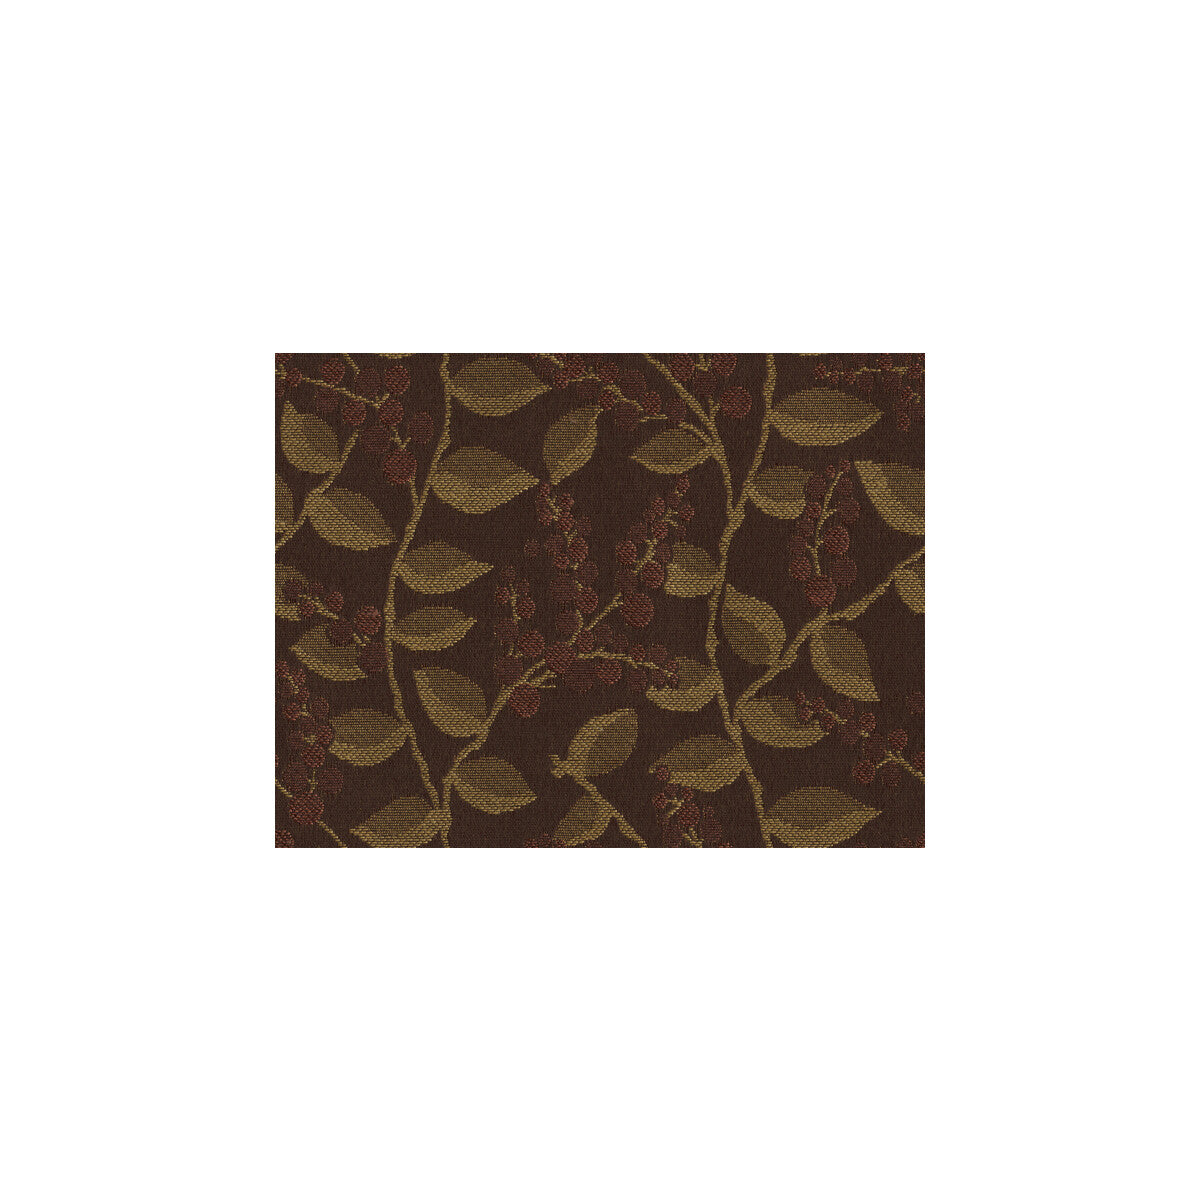 Vine Drive fabric in copper color - pattern 31527.624.0 - by Kravet Contract in the Contract Gis collection